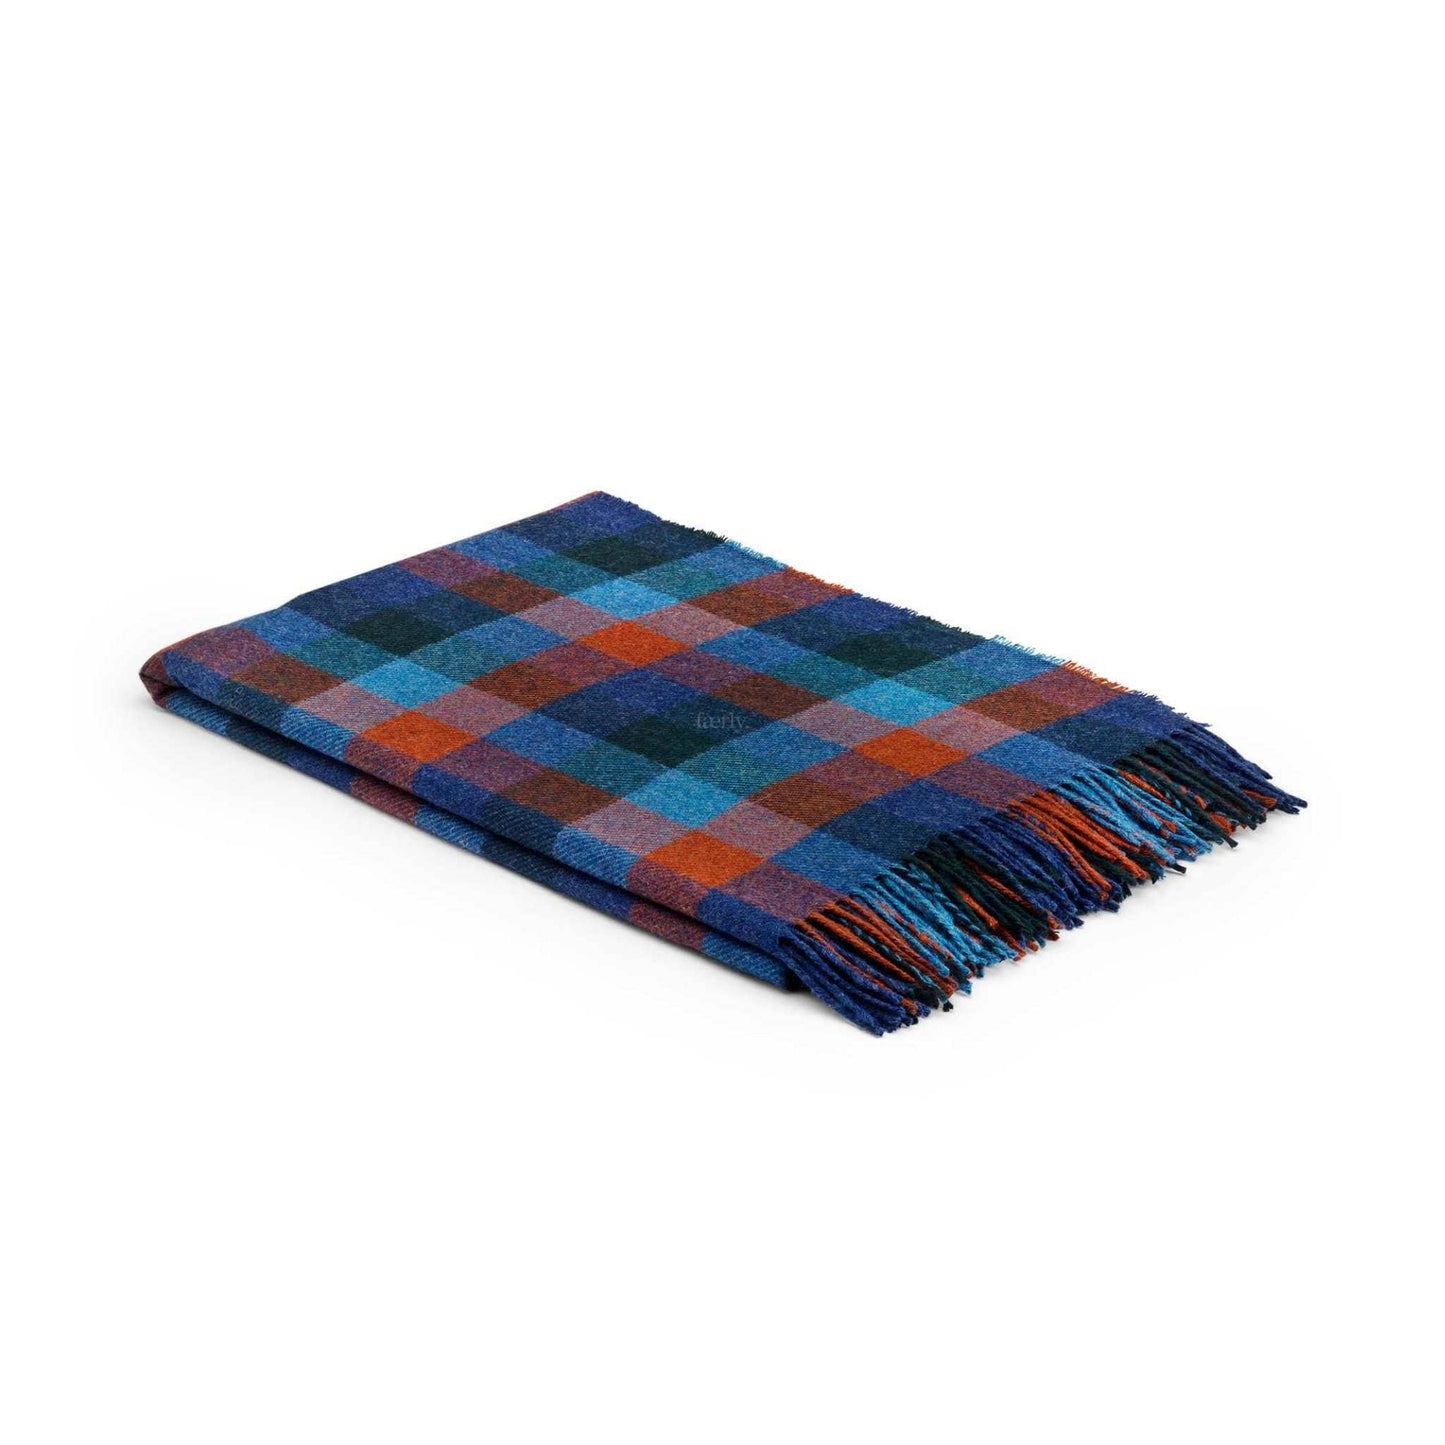 McNutt Blanket Recycled Wool Throw - Elements Plaid - McNutts of Donegal